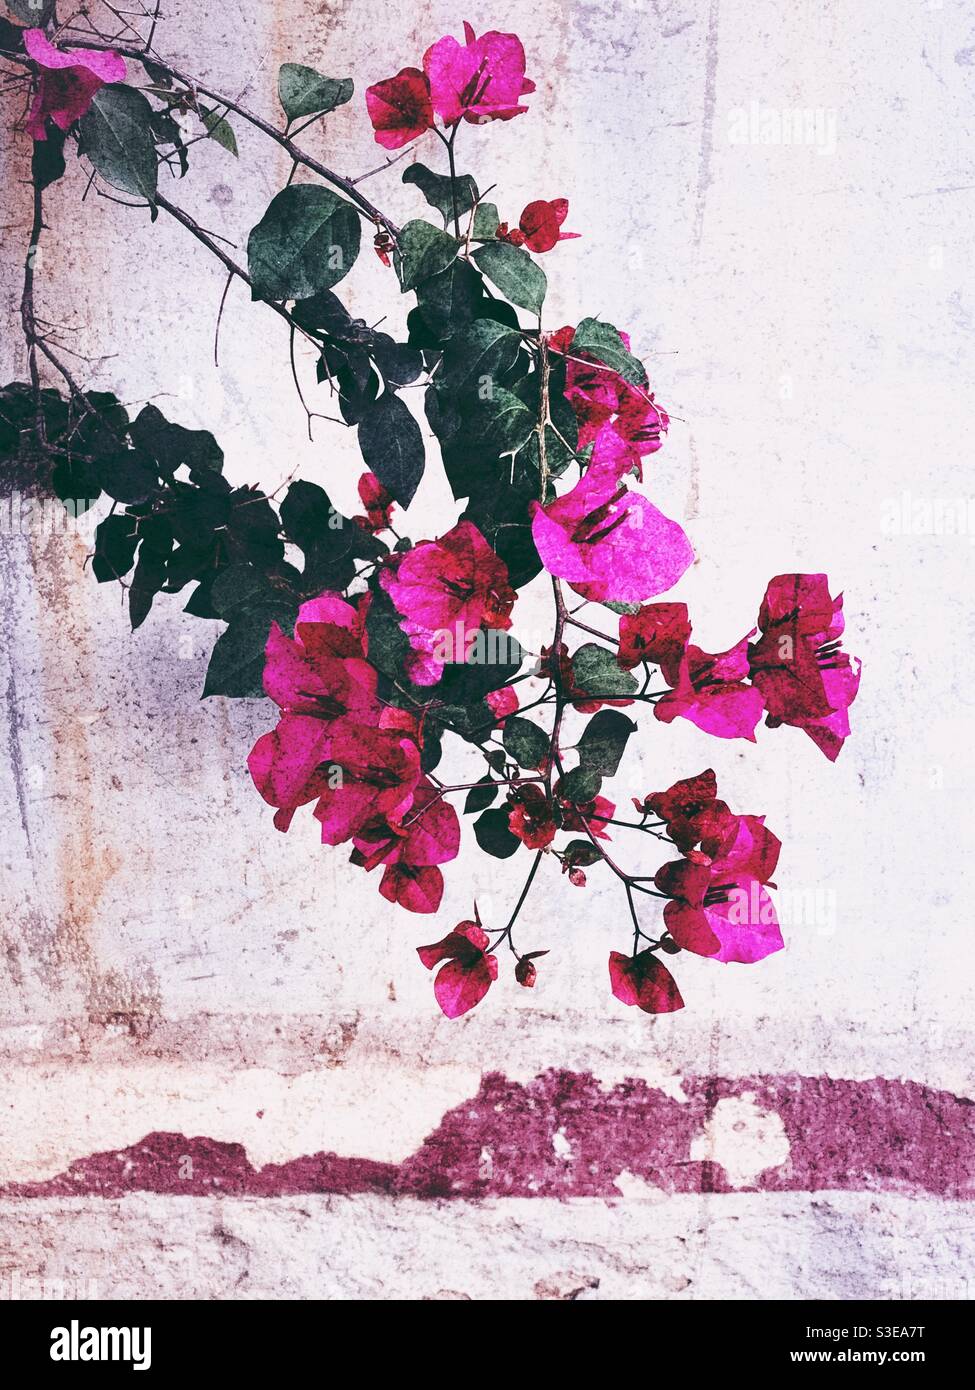 Pink bougainvillea flowers and green leaves with textured background Stock Photo